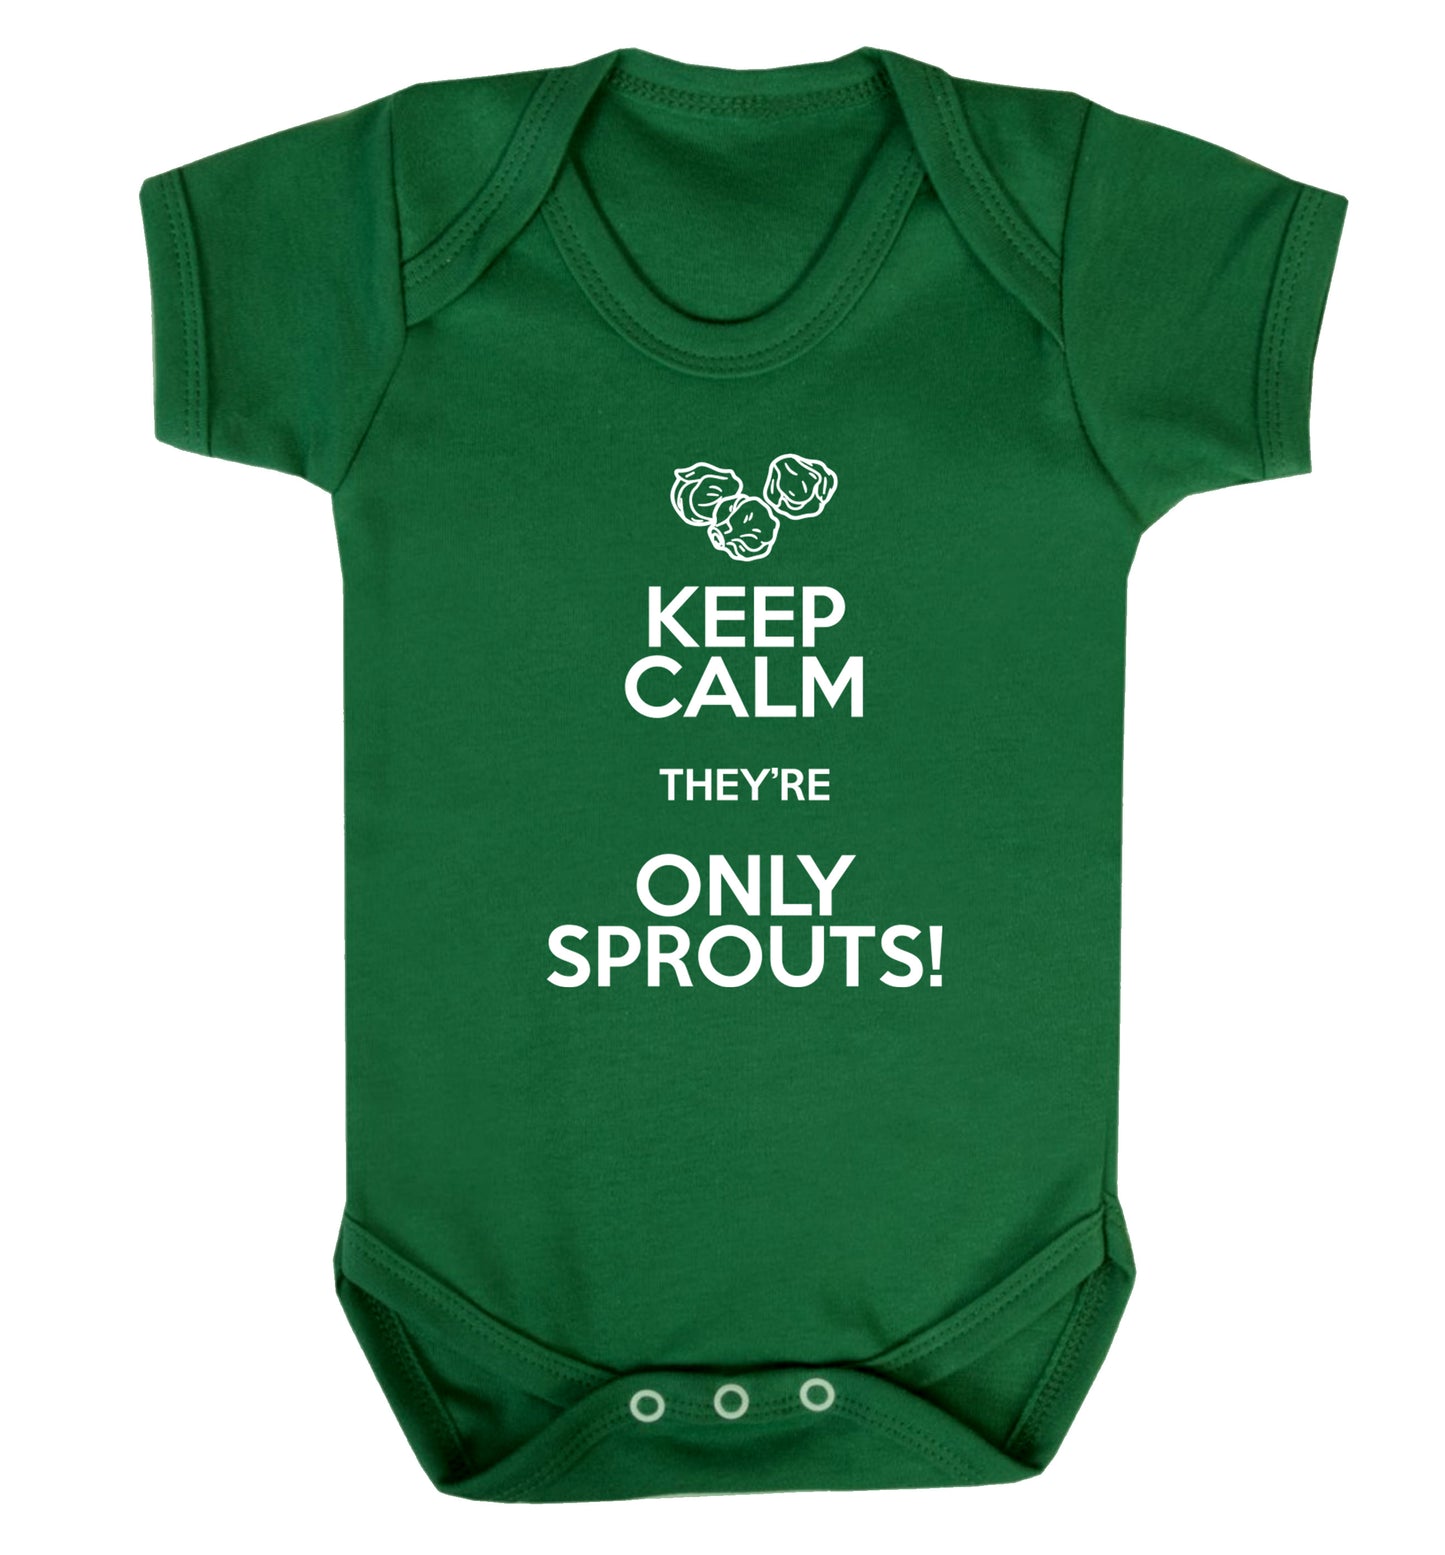 Keep calm they're only sprouts Baby Vest green 18-24 months